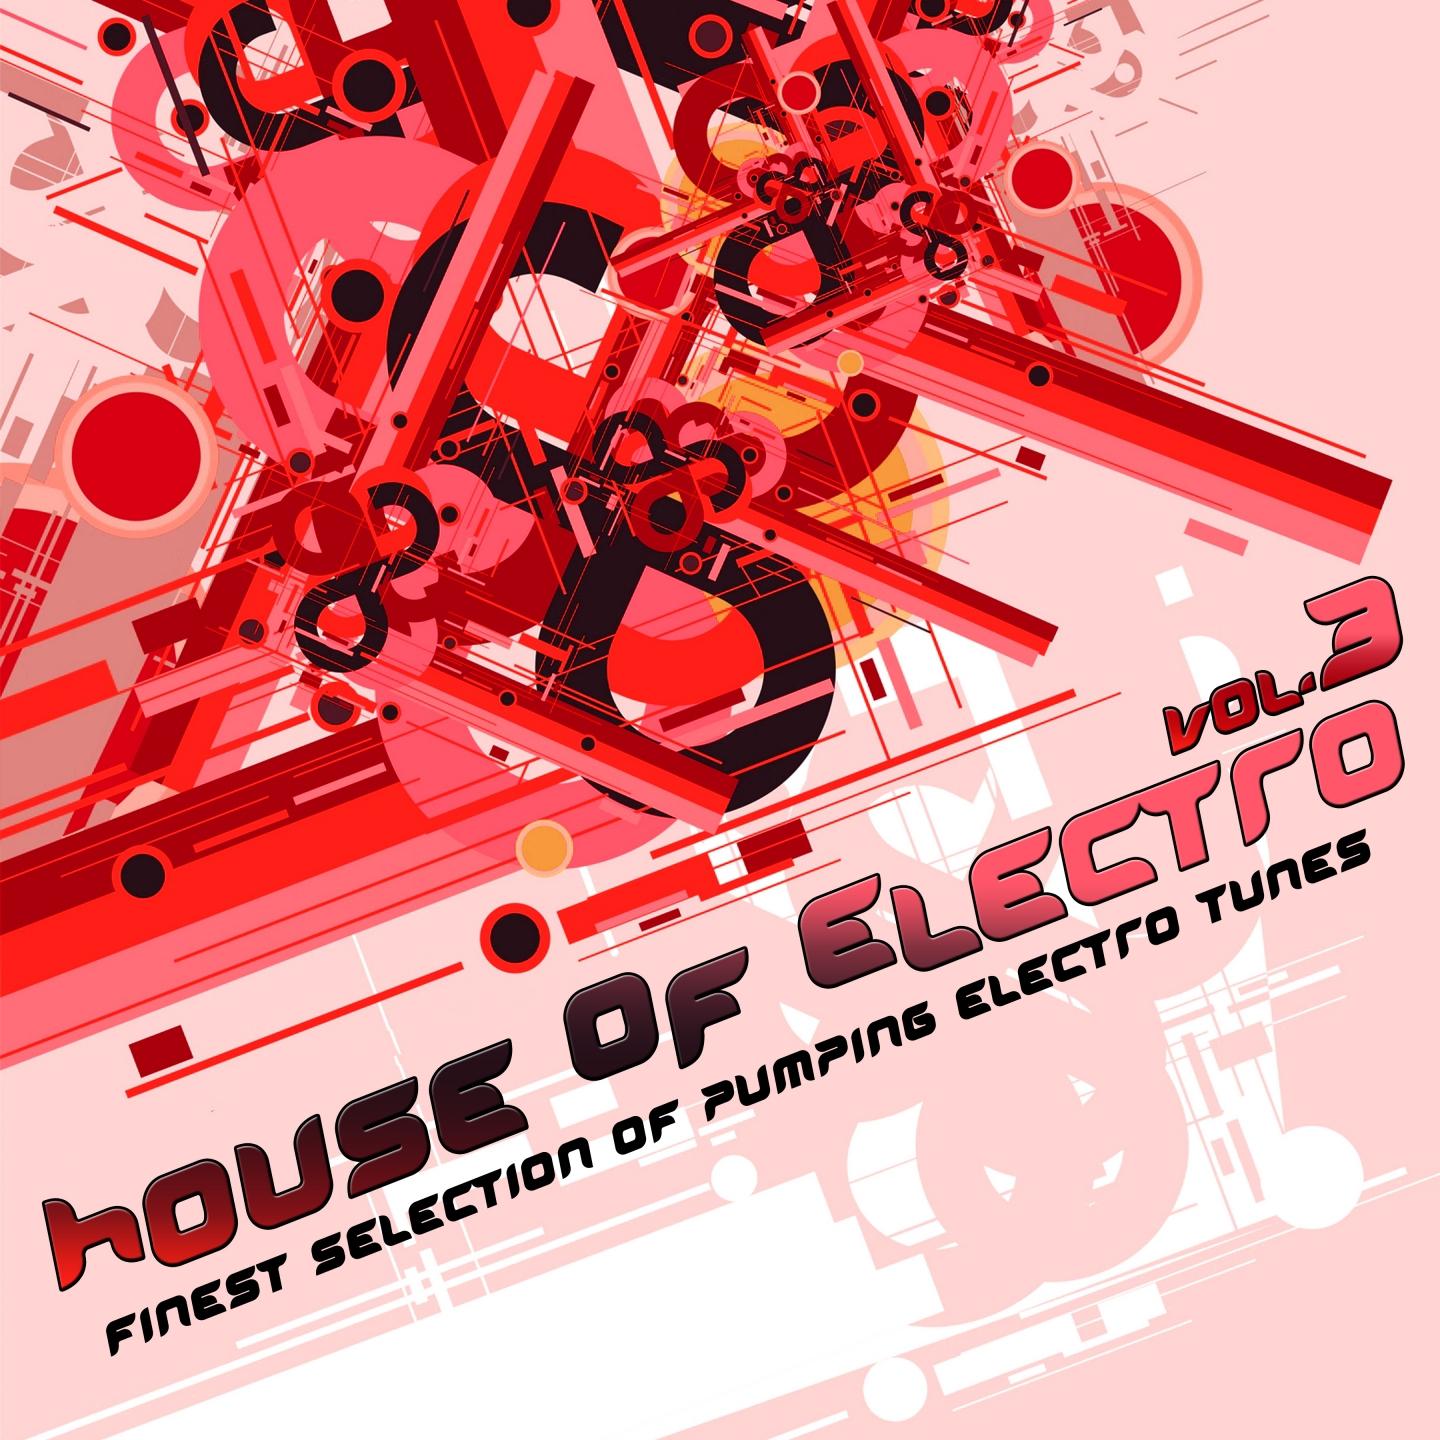 House of Electro, Vol. 3